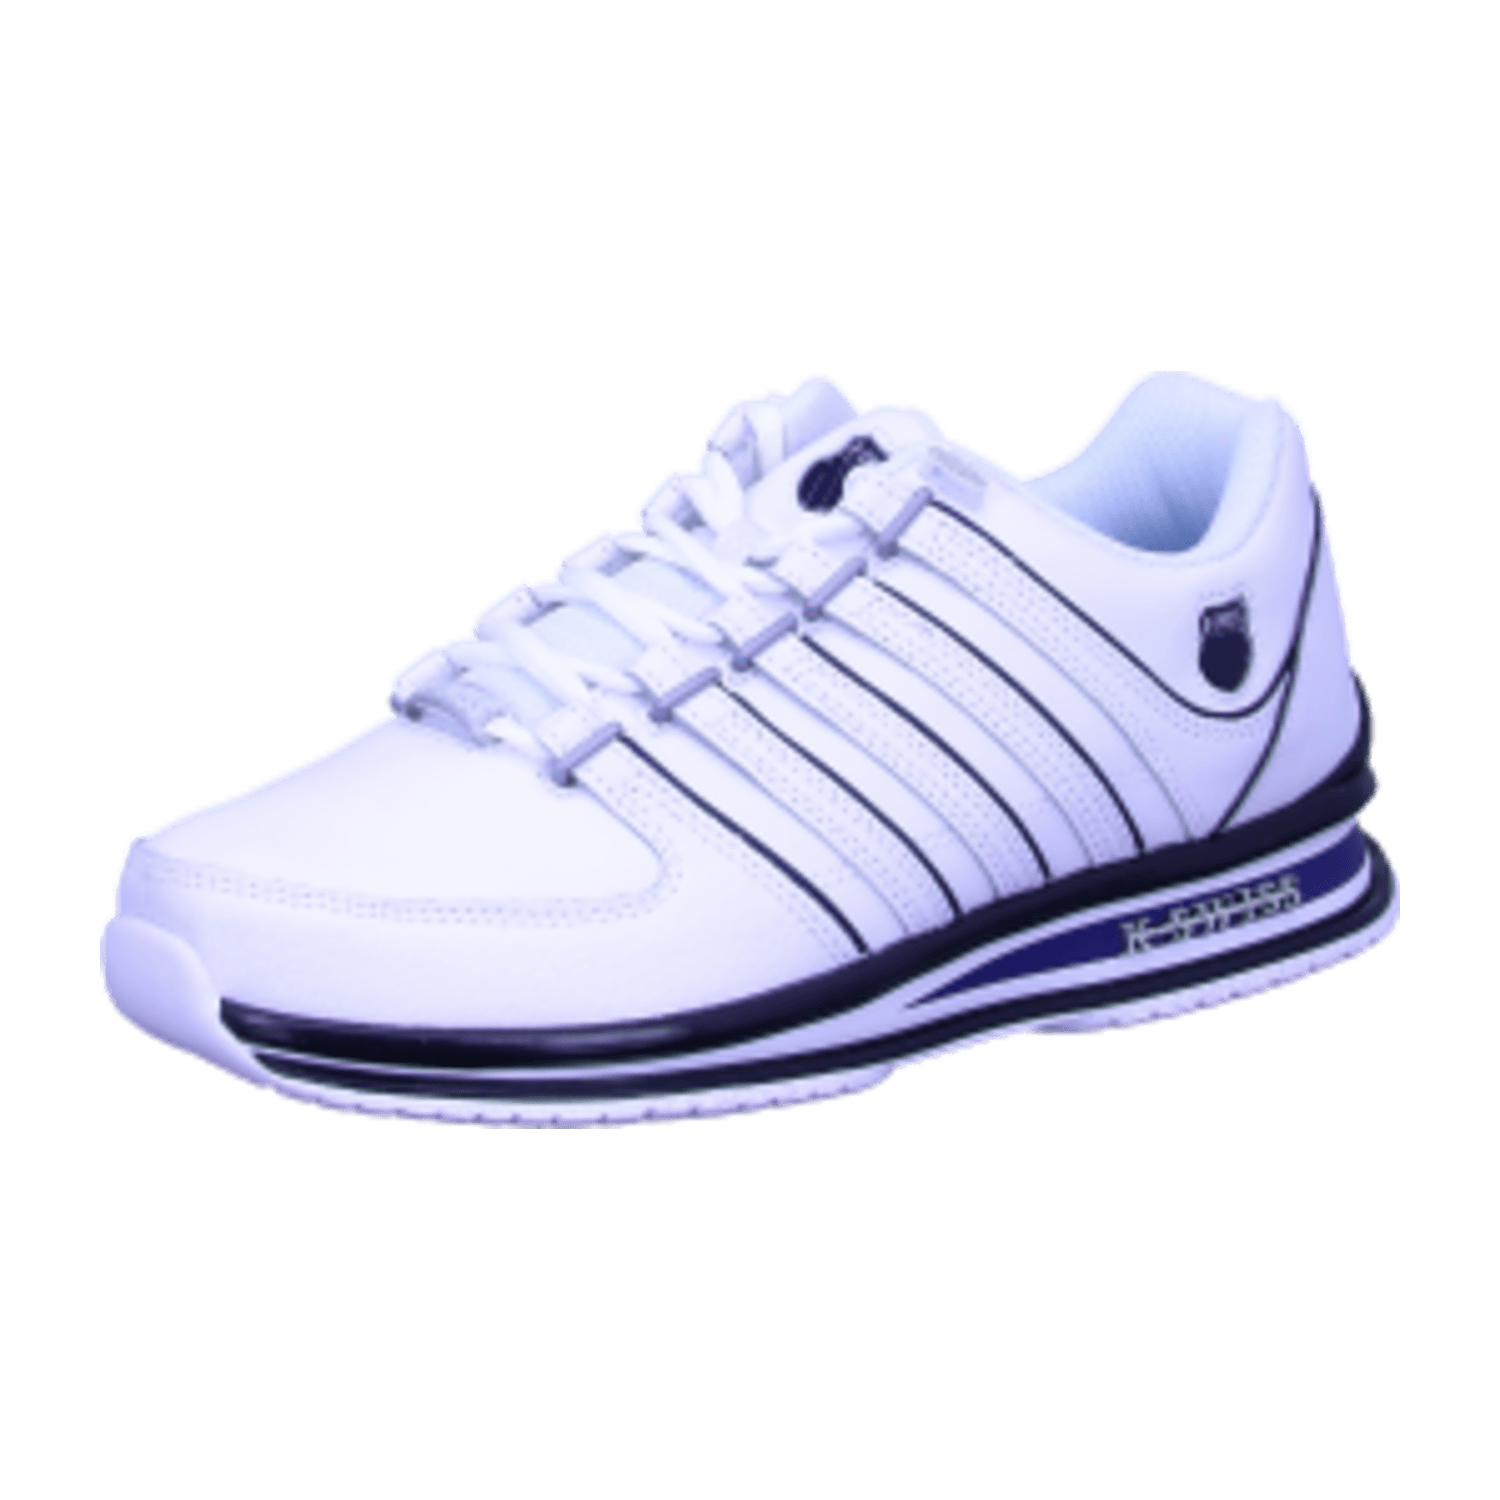 K-Swiss Rinzler 01235-139-M white/outer space